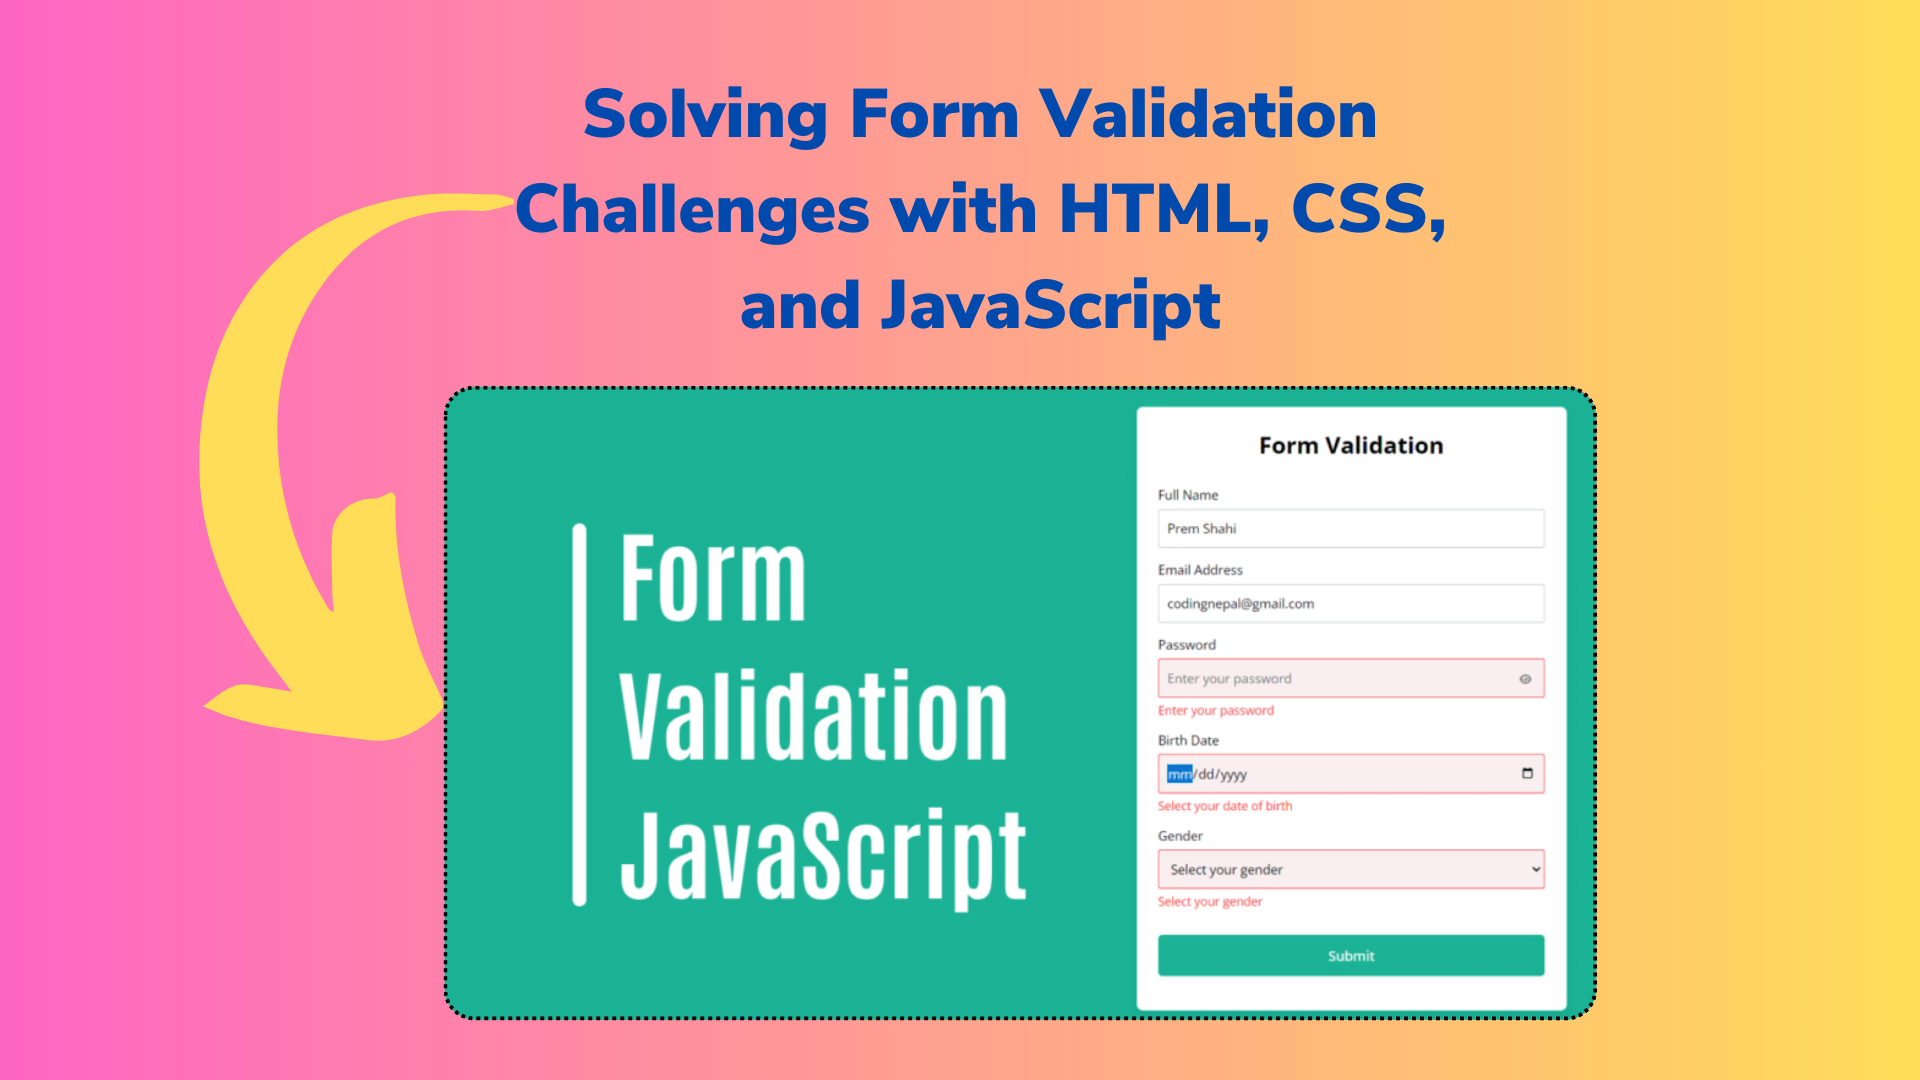 Solving Form Validation Challenges with HTML, CSS, and JavaScript